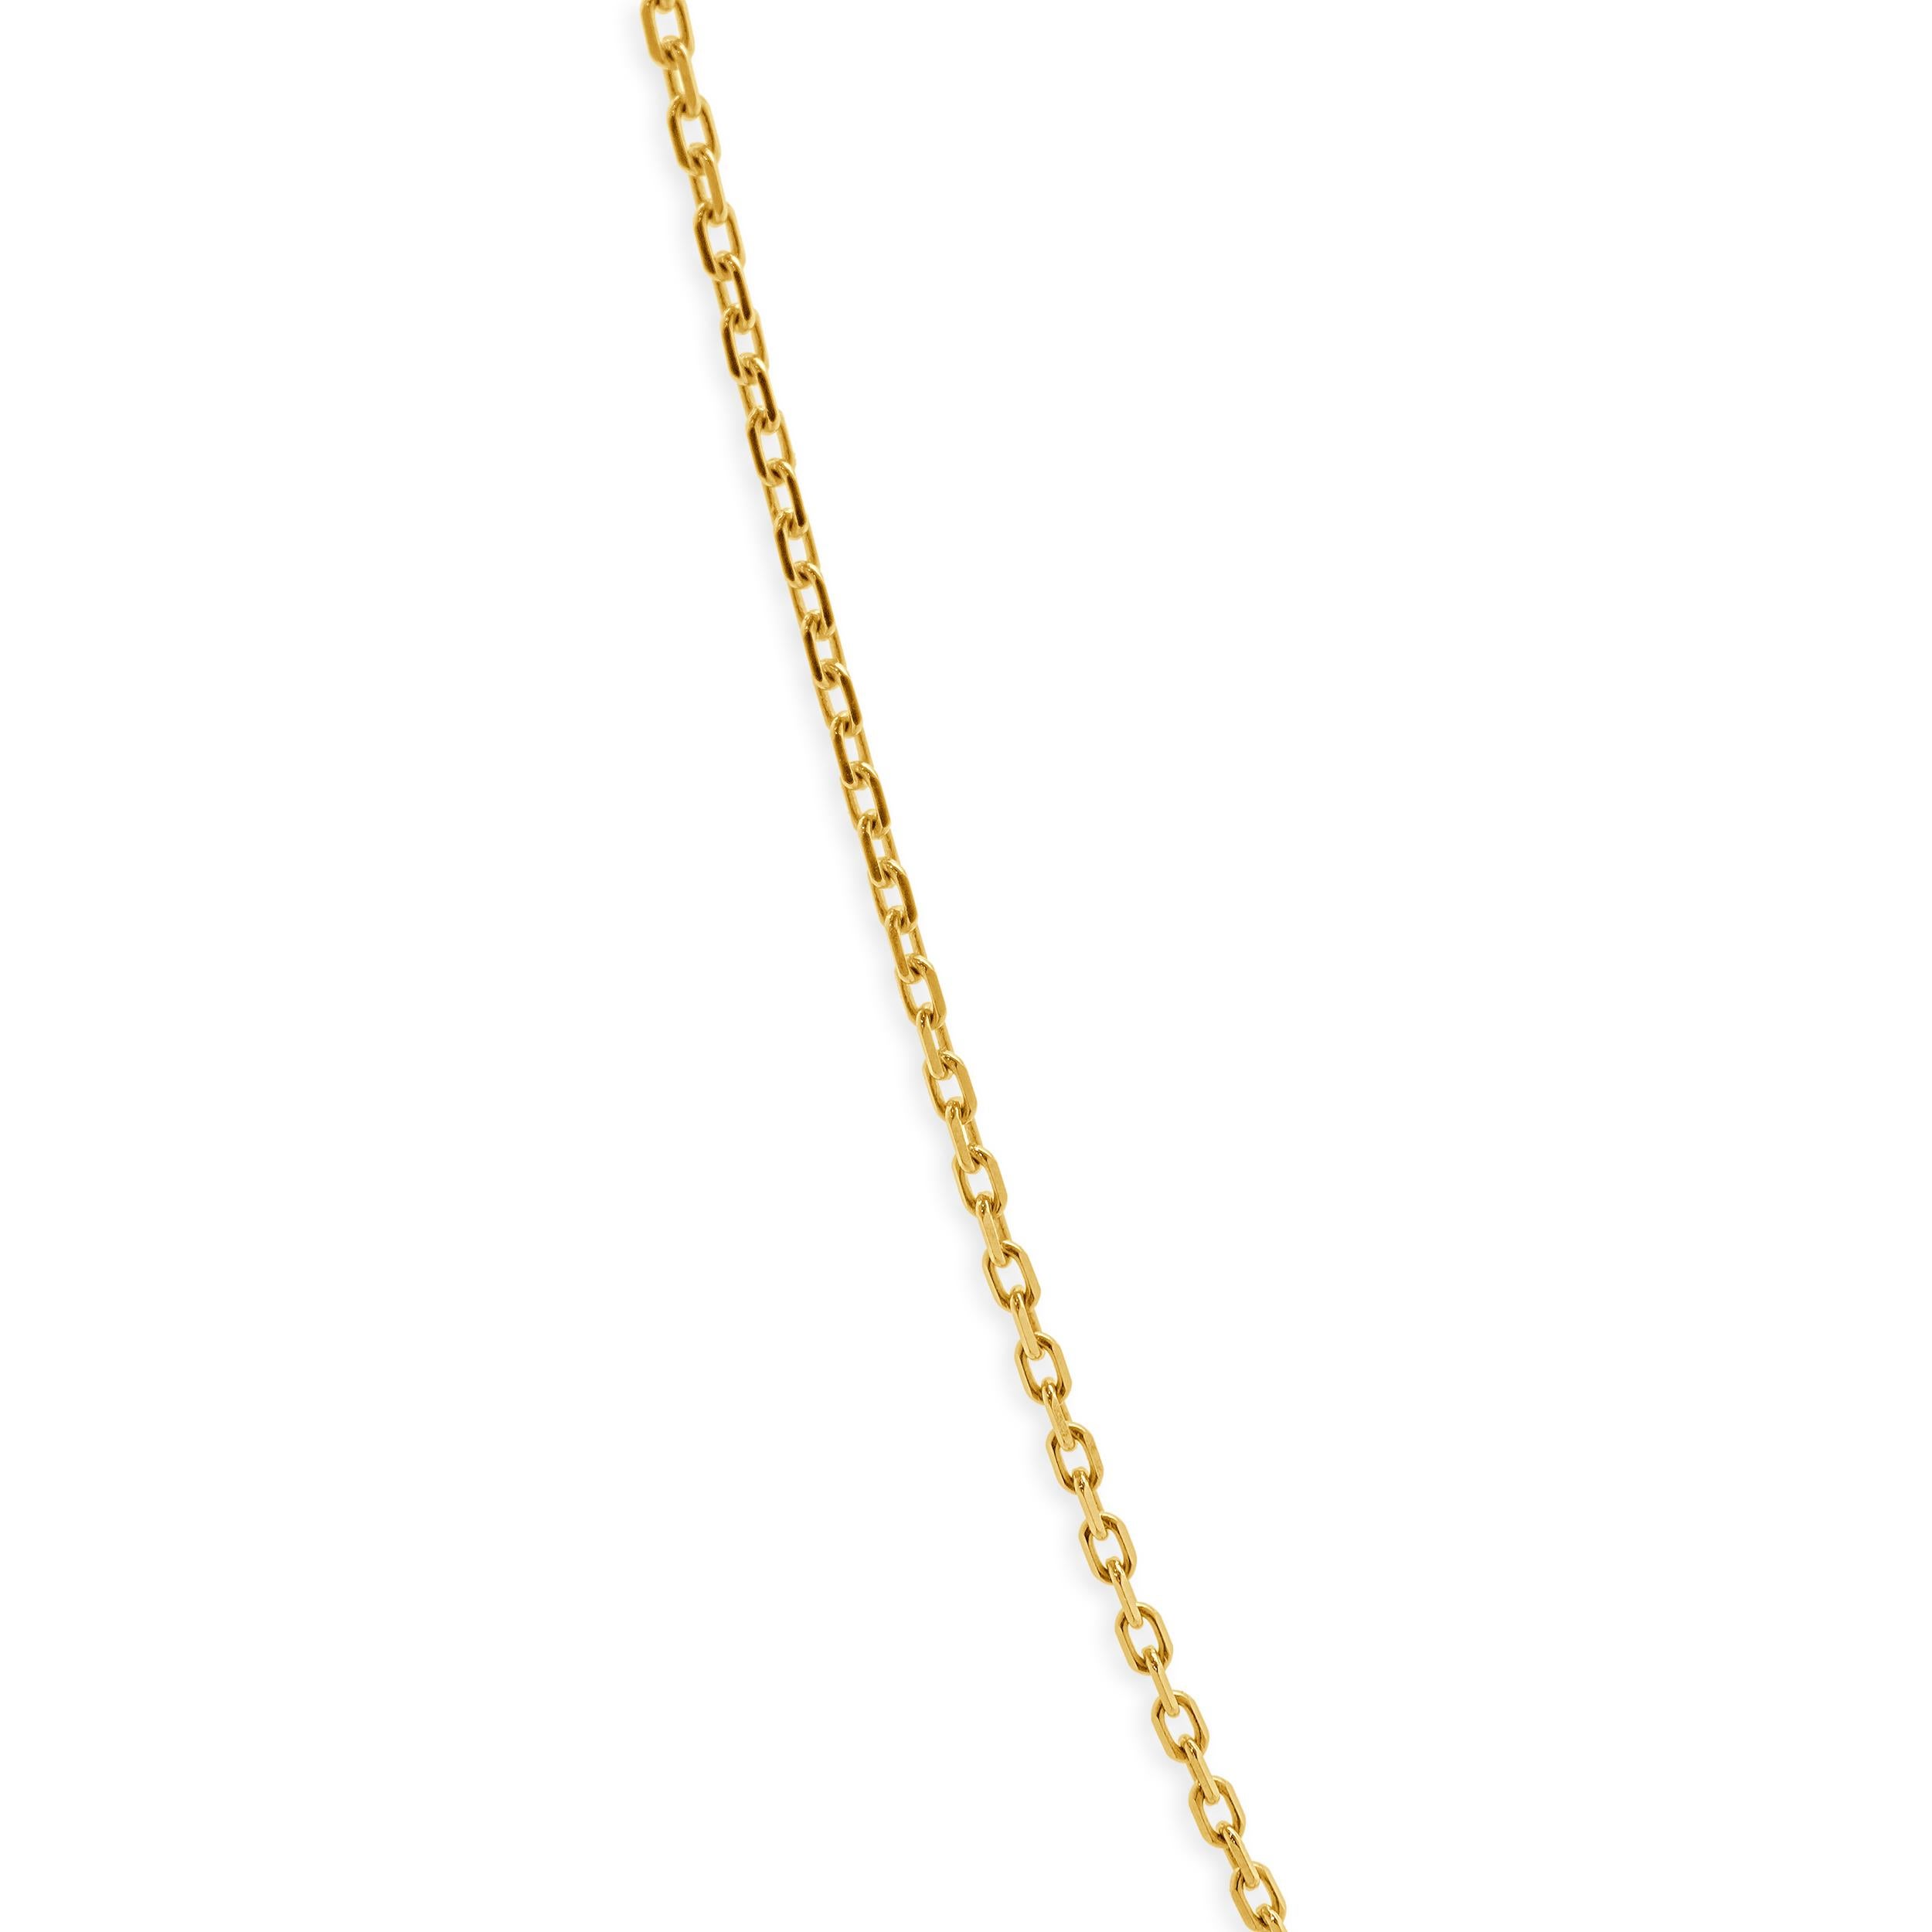 Material: 14K rose gold
Dimension: necklace measures 24-inches in length
Weight: 7.20 grams
